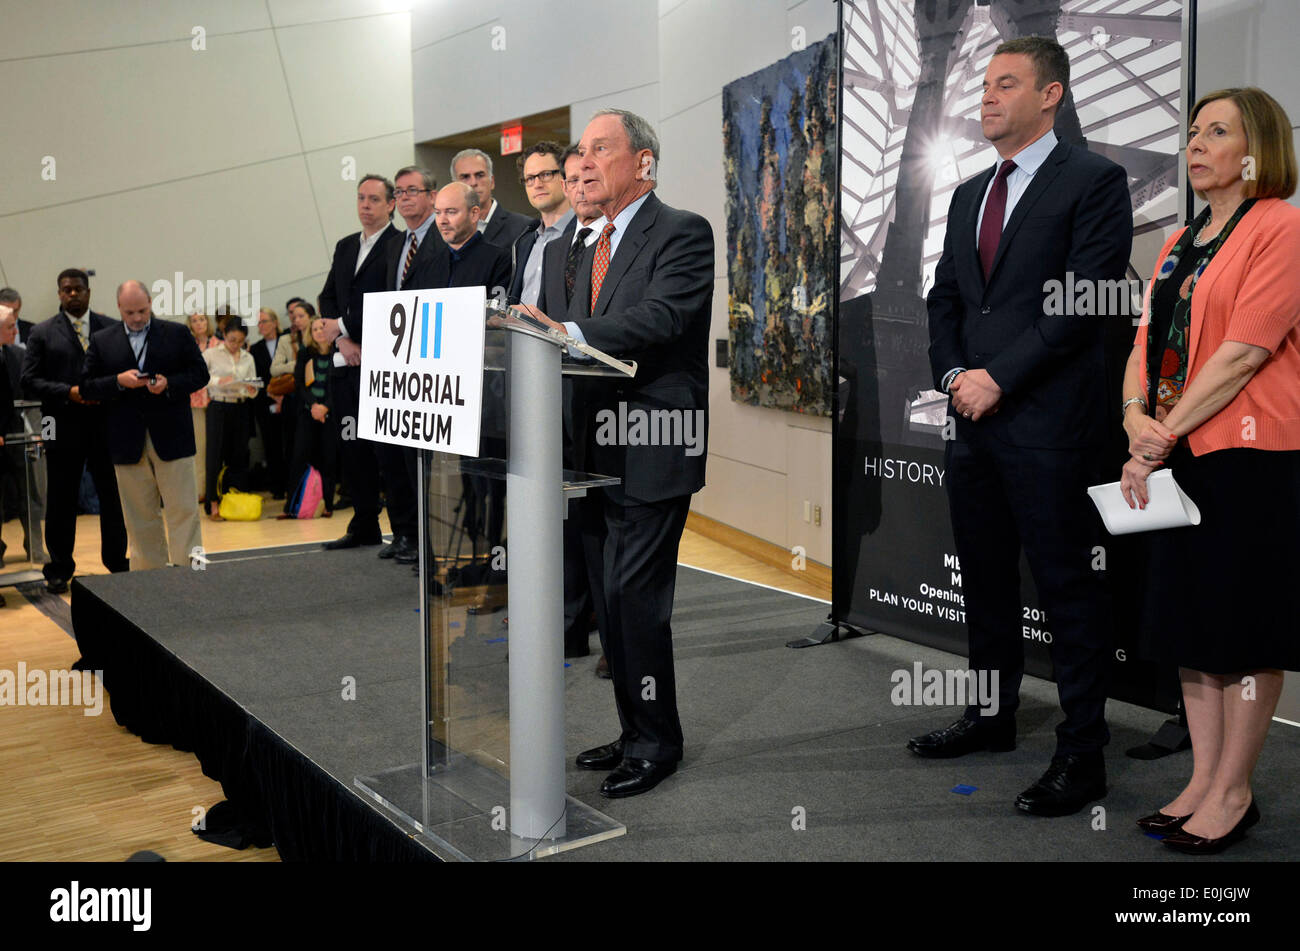 (140514) -- NEW YORK, May 14, 2014 (Xinhua) -- Michael Bloomberg (3rd R), Chairman of the 9/11 Memorial Museum and Mayor of New York City from 2002-2013 delivers a speech during a preview of the National September 11 Memorial Museum in New York, May 14, 2014. The National September 11 Memorial Museum will serve as the country's principal institution for examining the implications of the events of 9/11, documenting the impact of those events and exploring the continuing significance of September 11, 2001. The Museum's 110,000 square feet of exhibition space is located within the archaeological Stock Photo